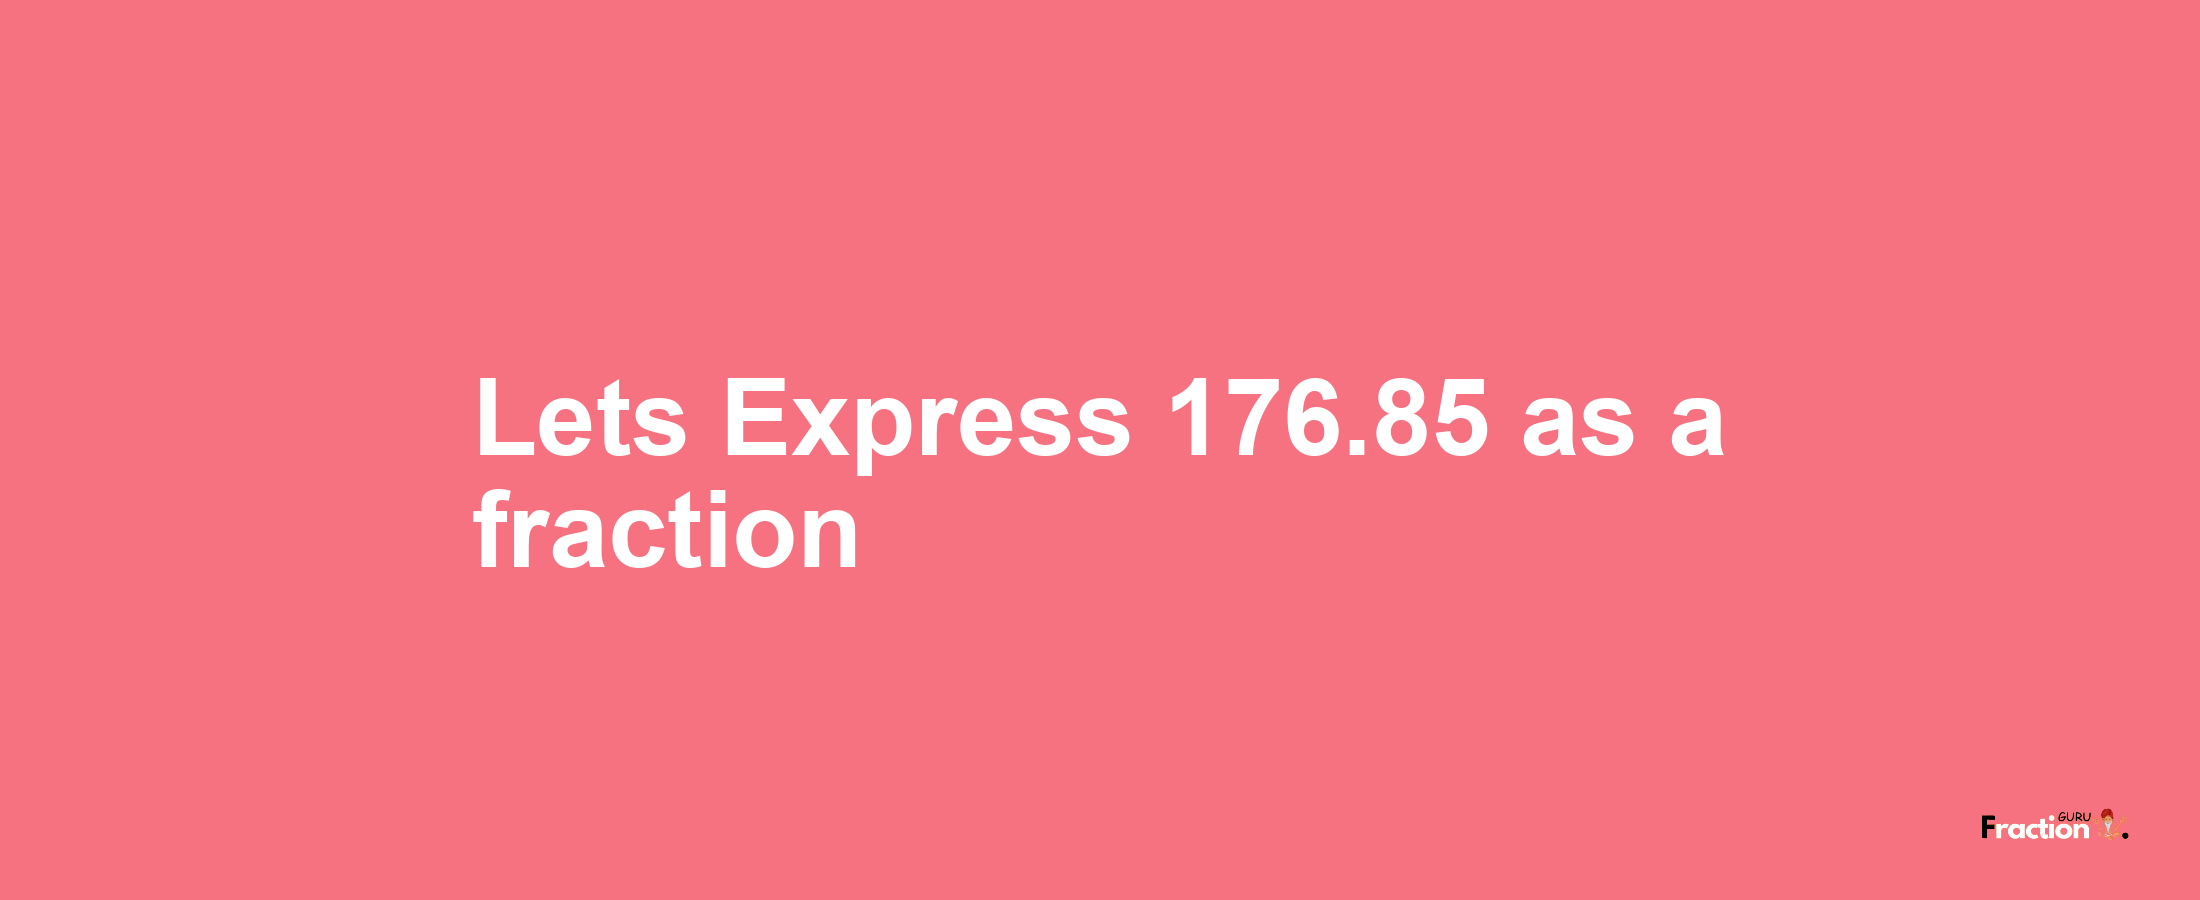 Lets Express 176.85 as afraction